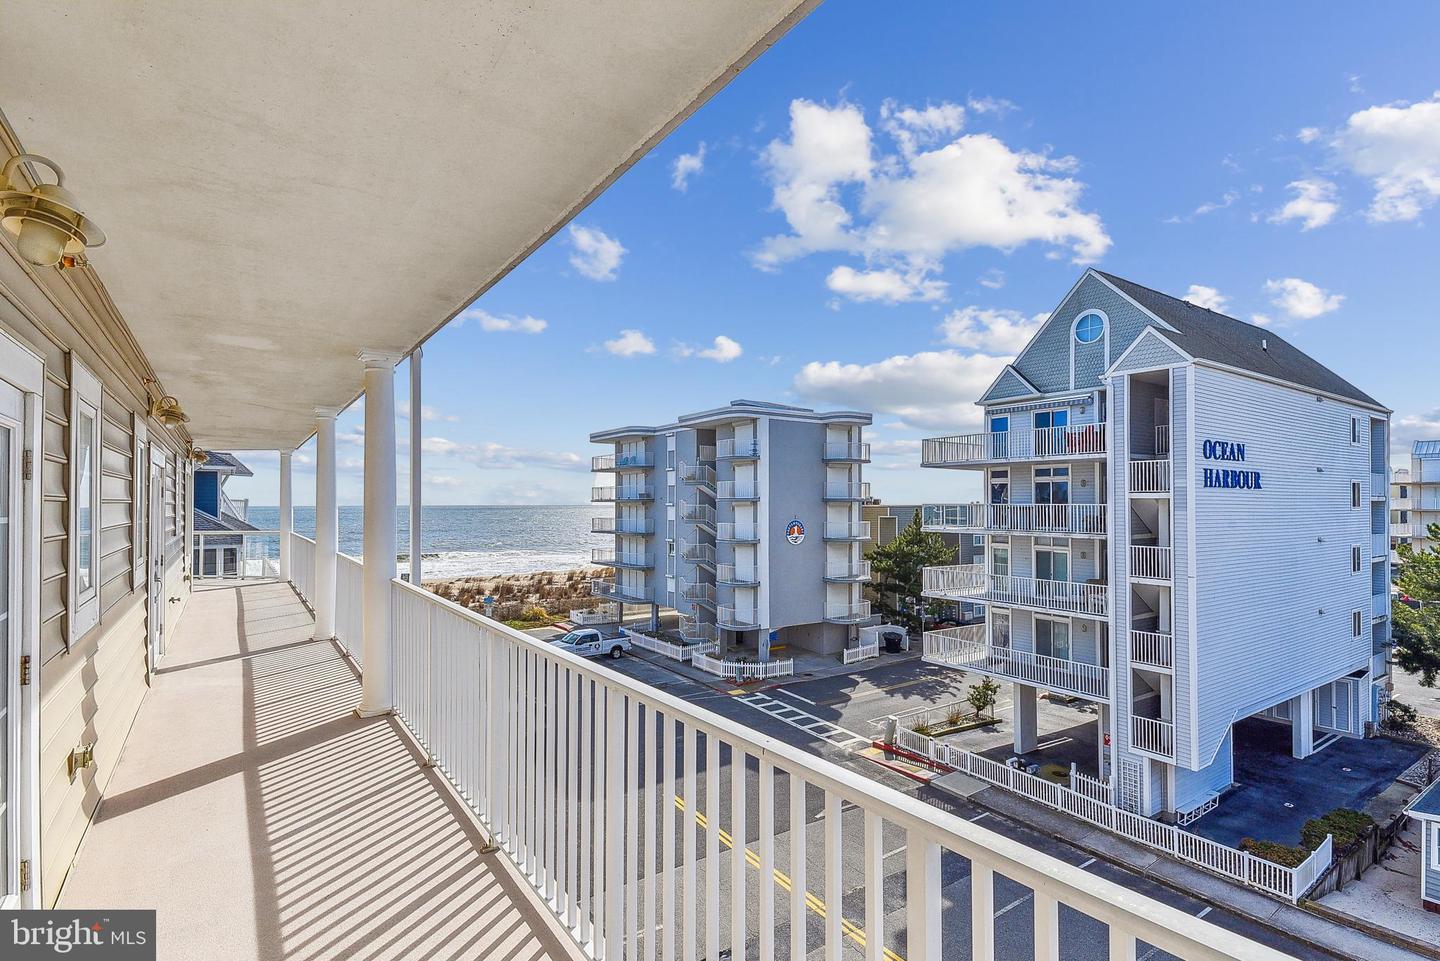 MDWO2019340-802917242842-2024-03-12-11-41-10 14301 Wight St #201 | Ocean City, MD Real Estate For Sale | MLS# Mdwo2019340  - 1st Choice Properties